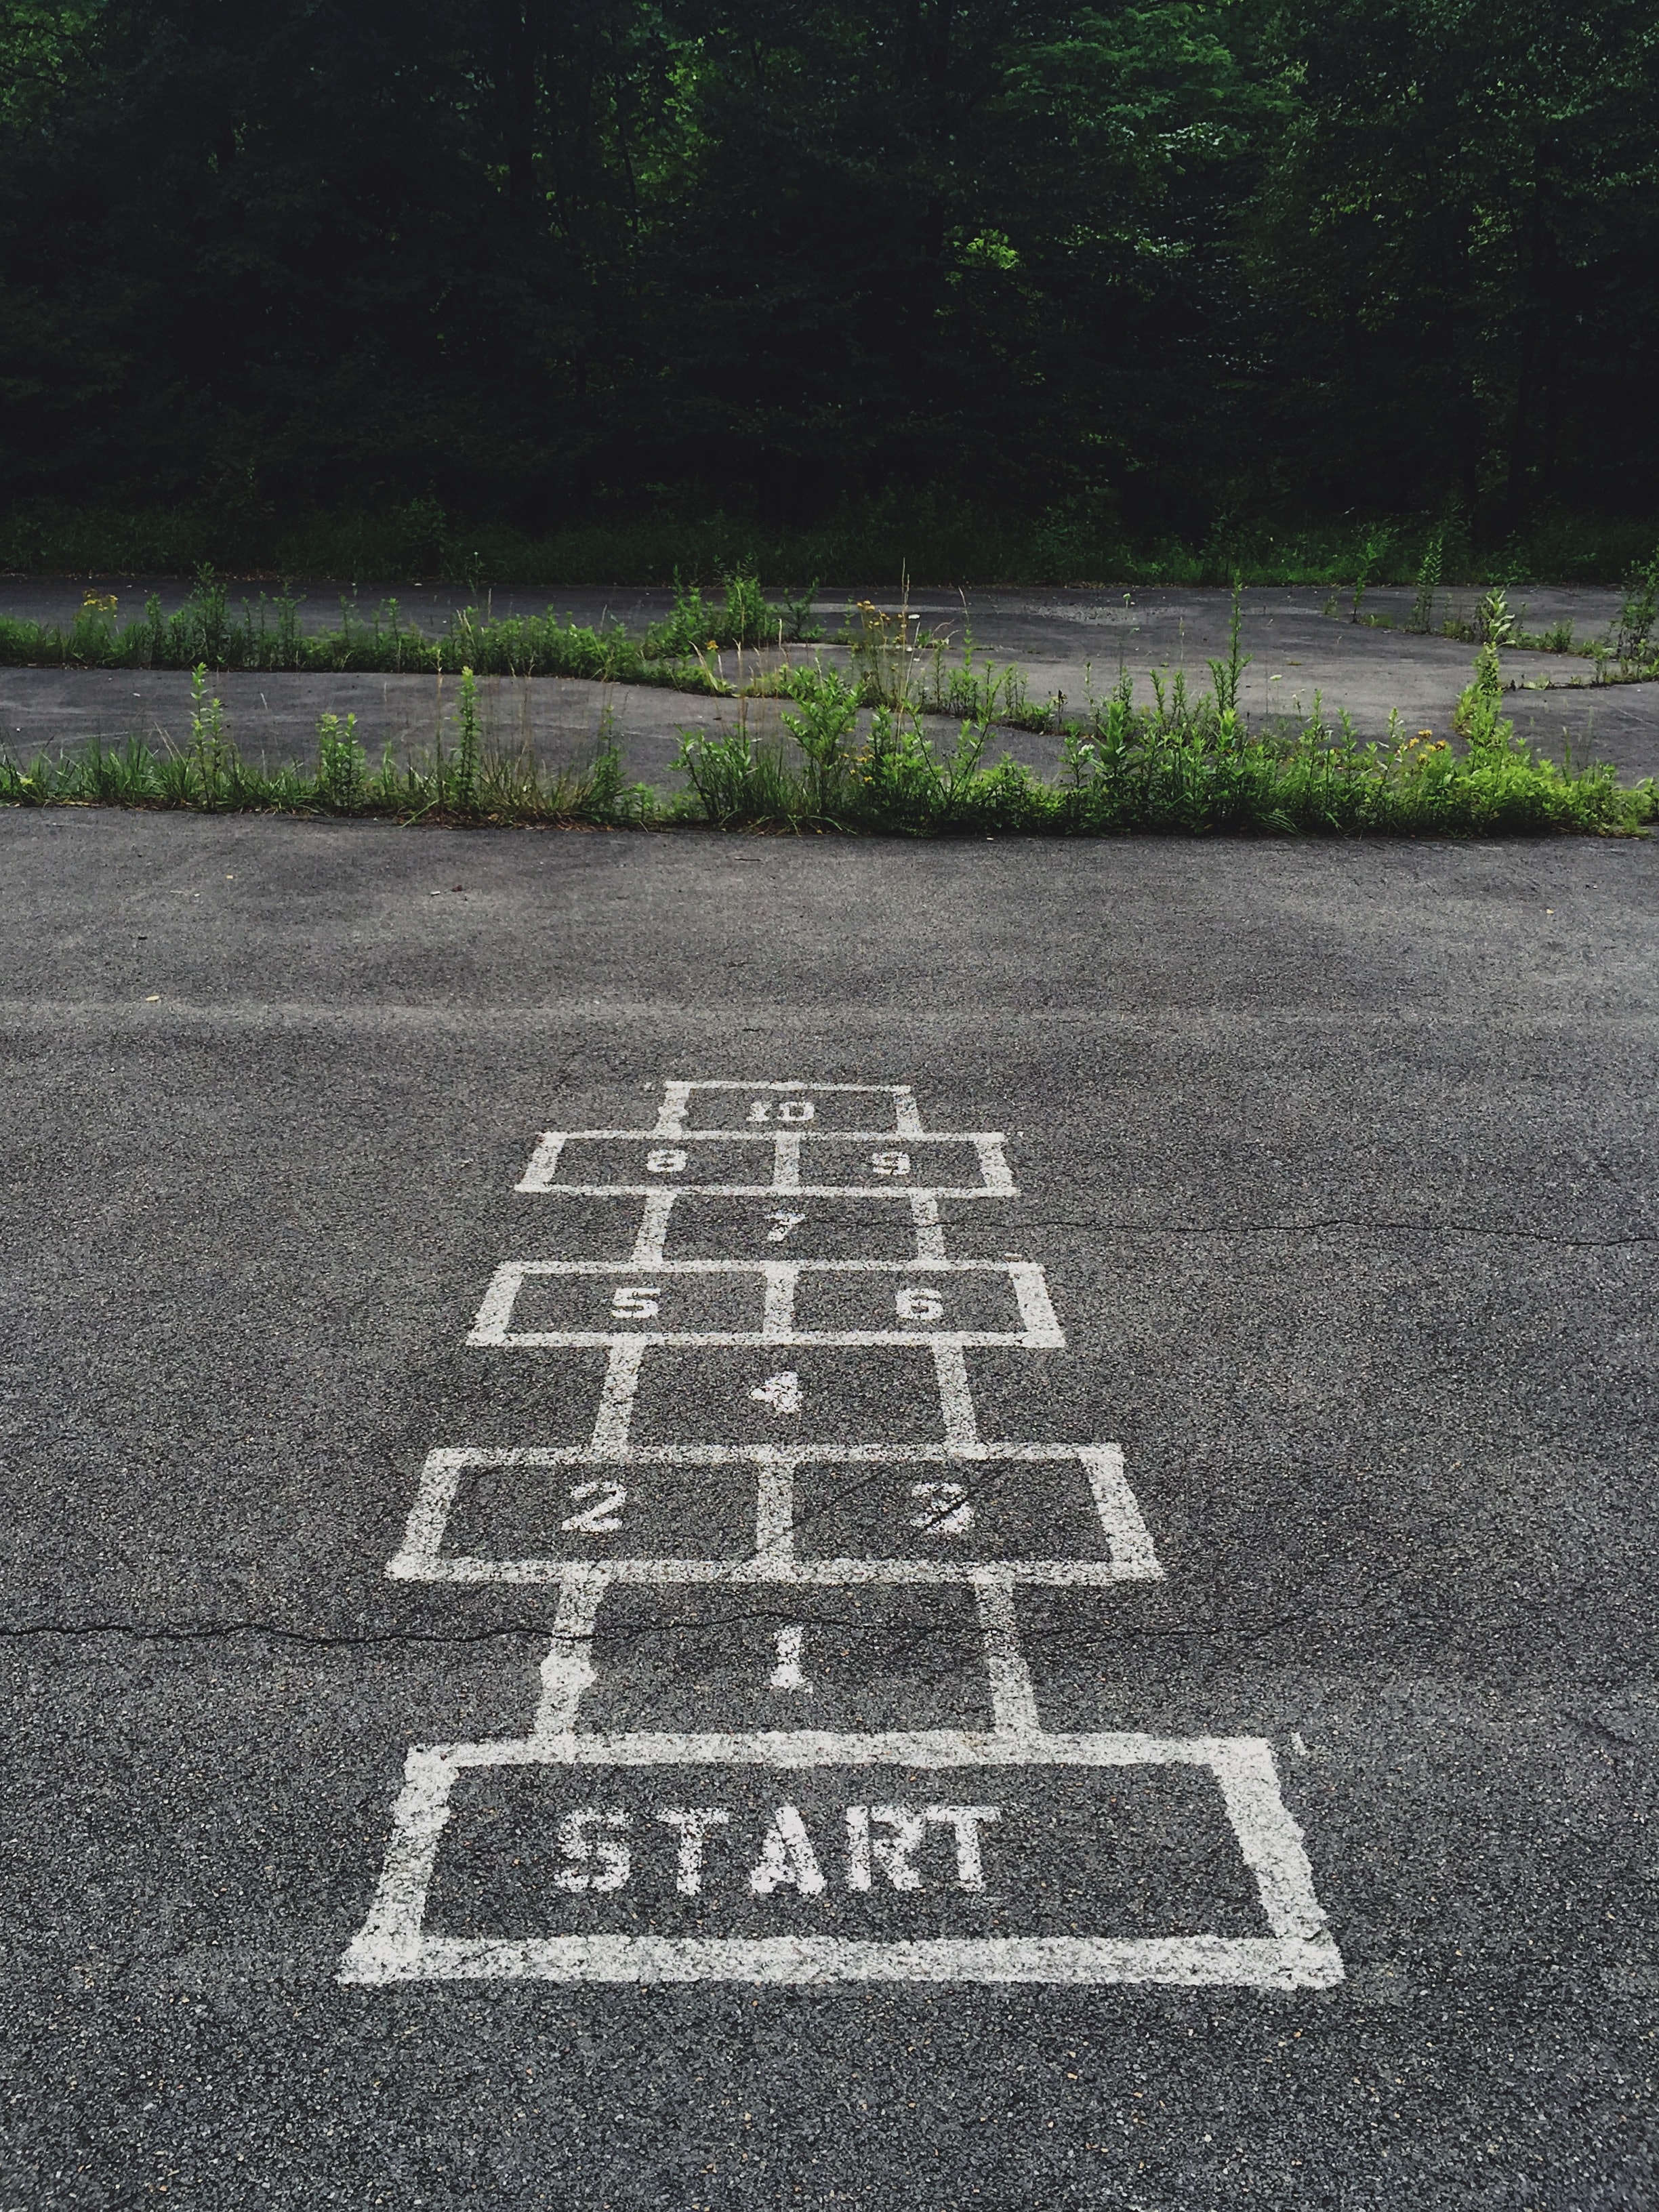 A hopscotch grid painted on asphalt with the word "Start" painted into the first block.